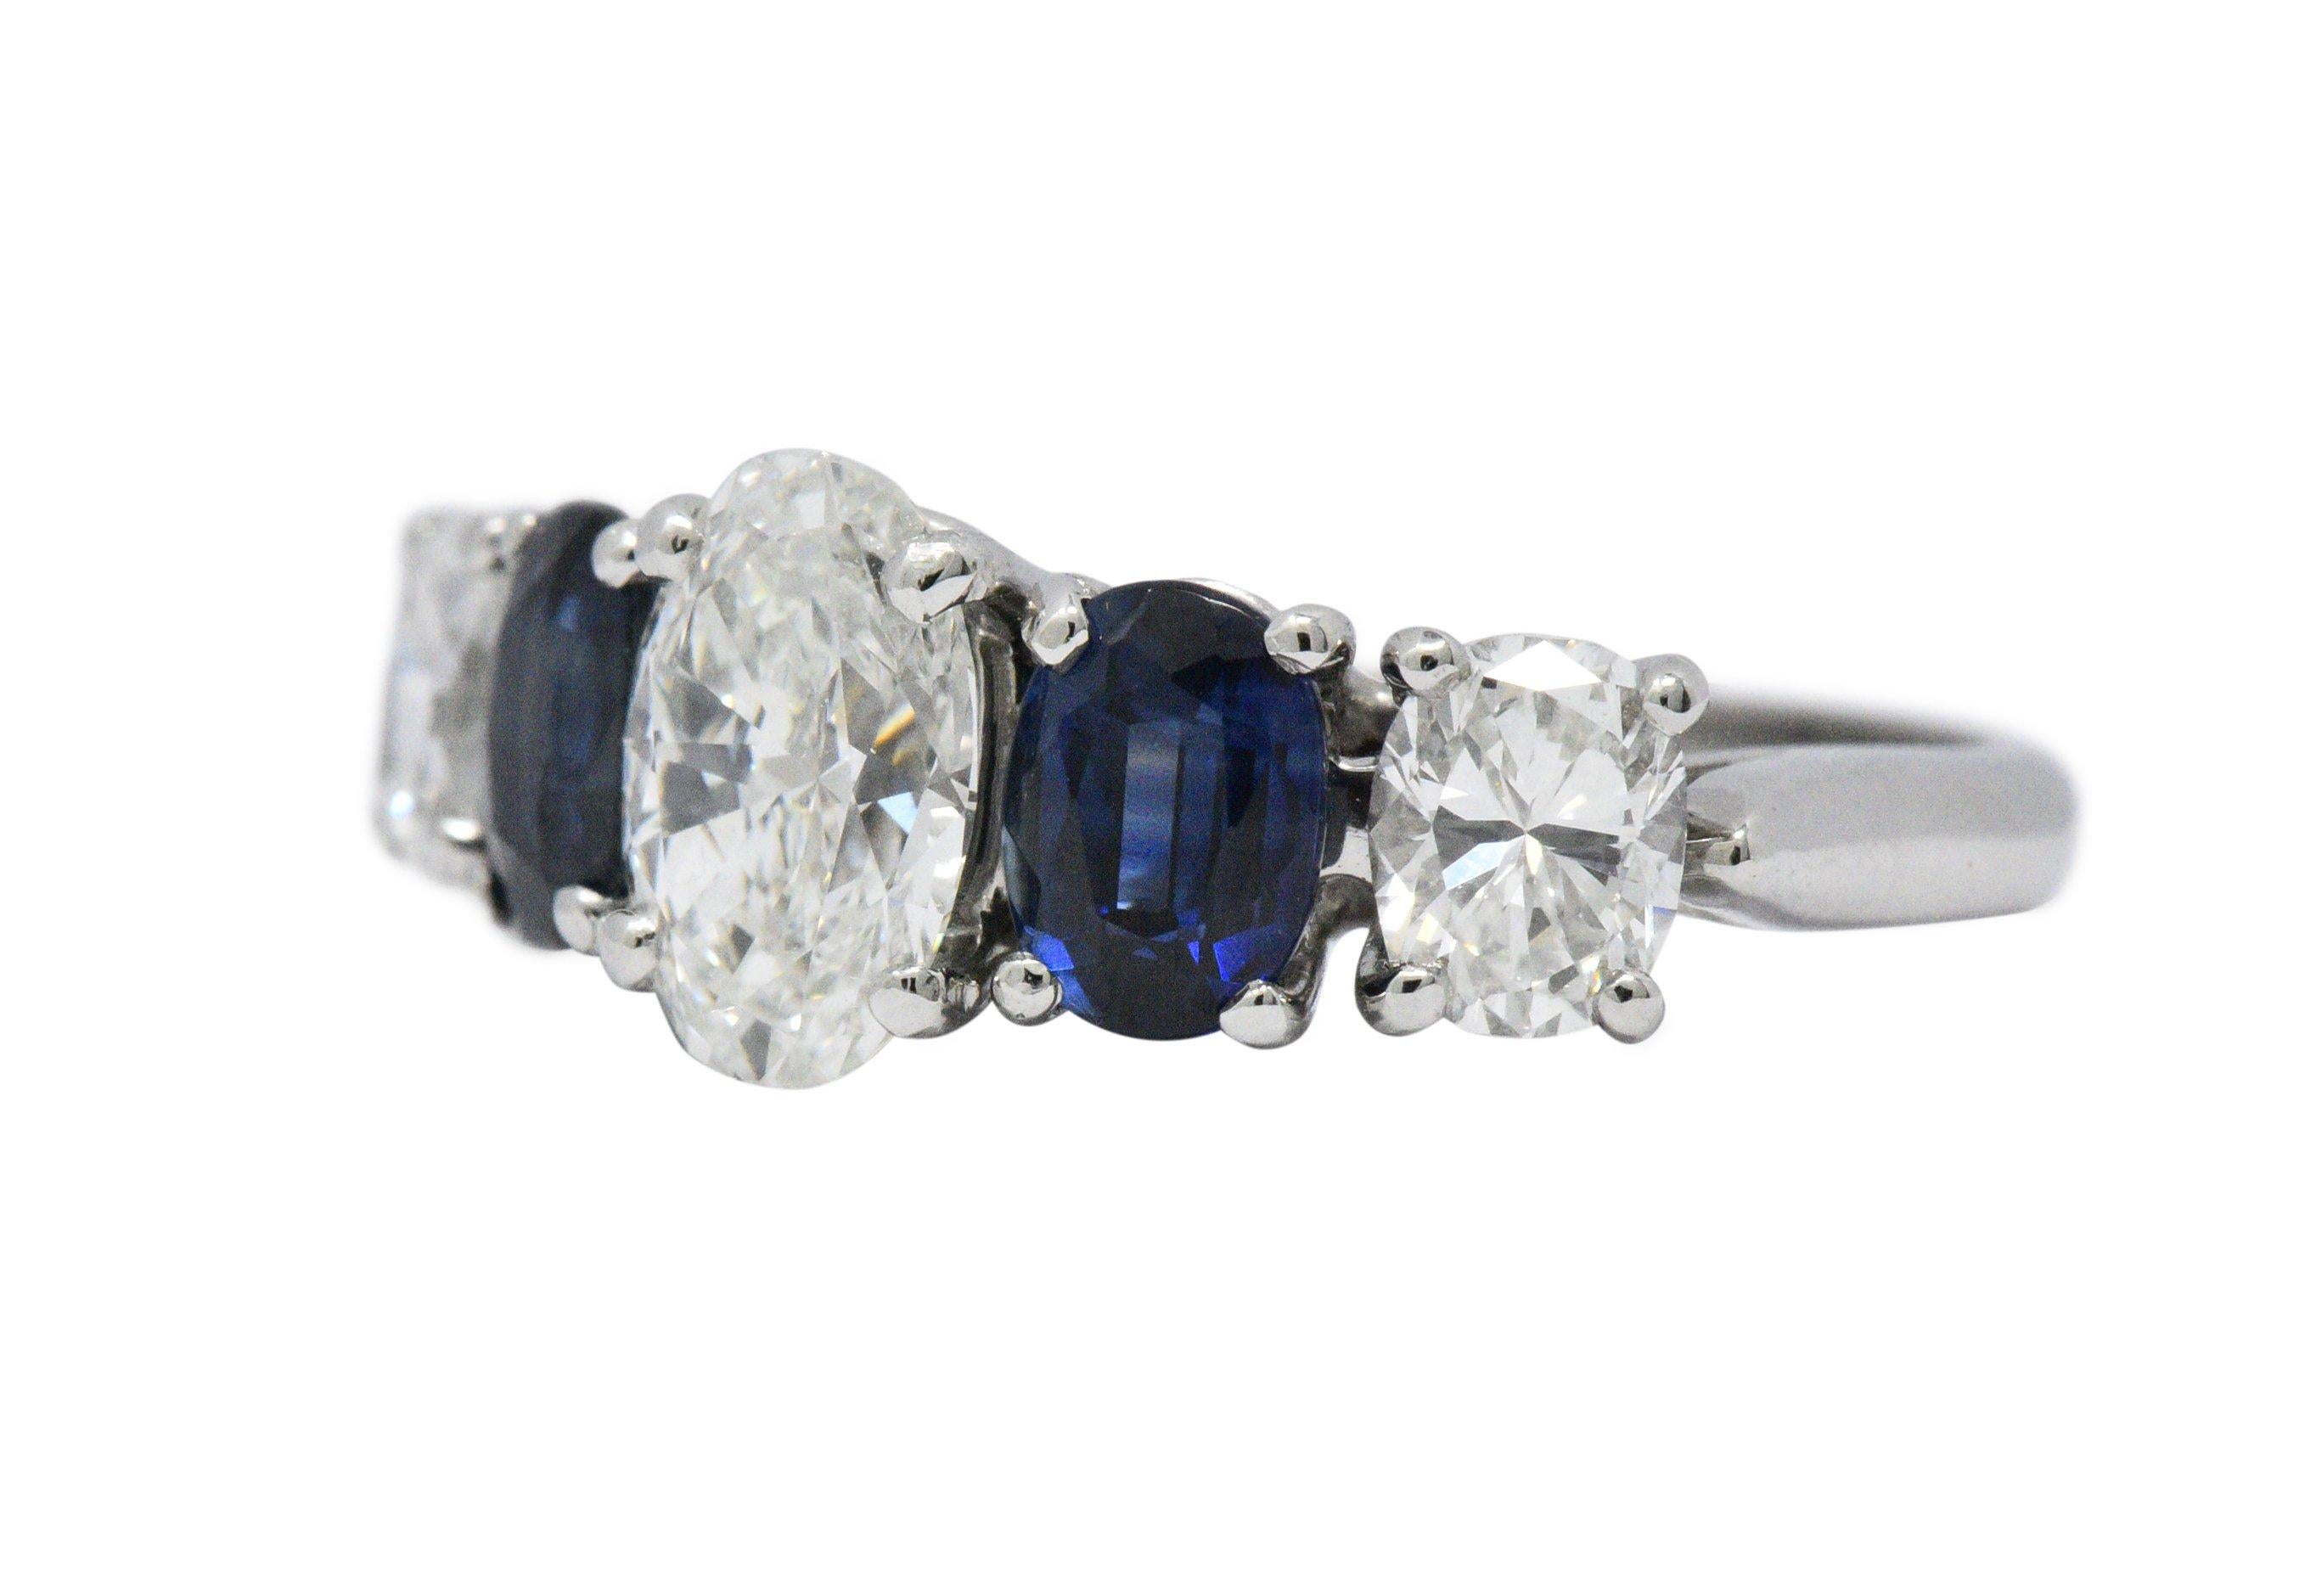 Centering an oval cut diamond weighing 1.00 carats, H color, VVS1 clarity and accompanied by a GIA Diamond Grading Report
Flanked by oval cut sapphires on each side, two total weighing approximately 1.20 carats total, deep blue and well matched
With